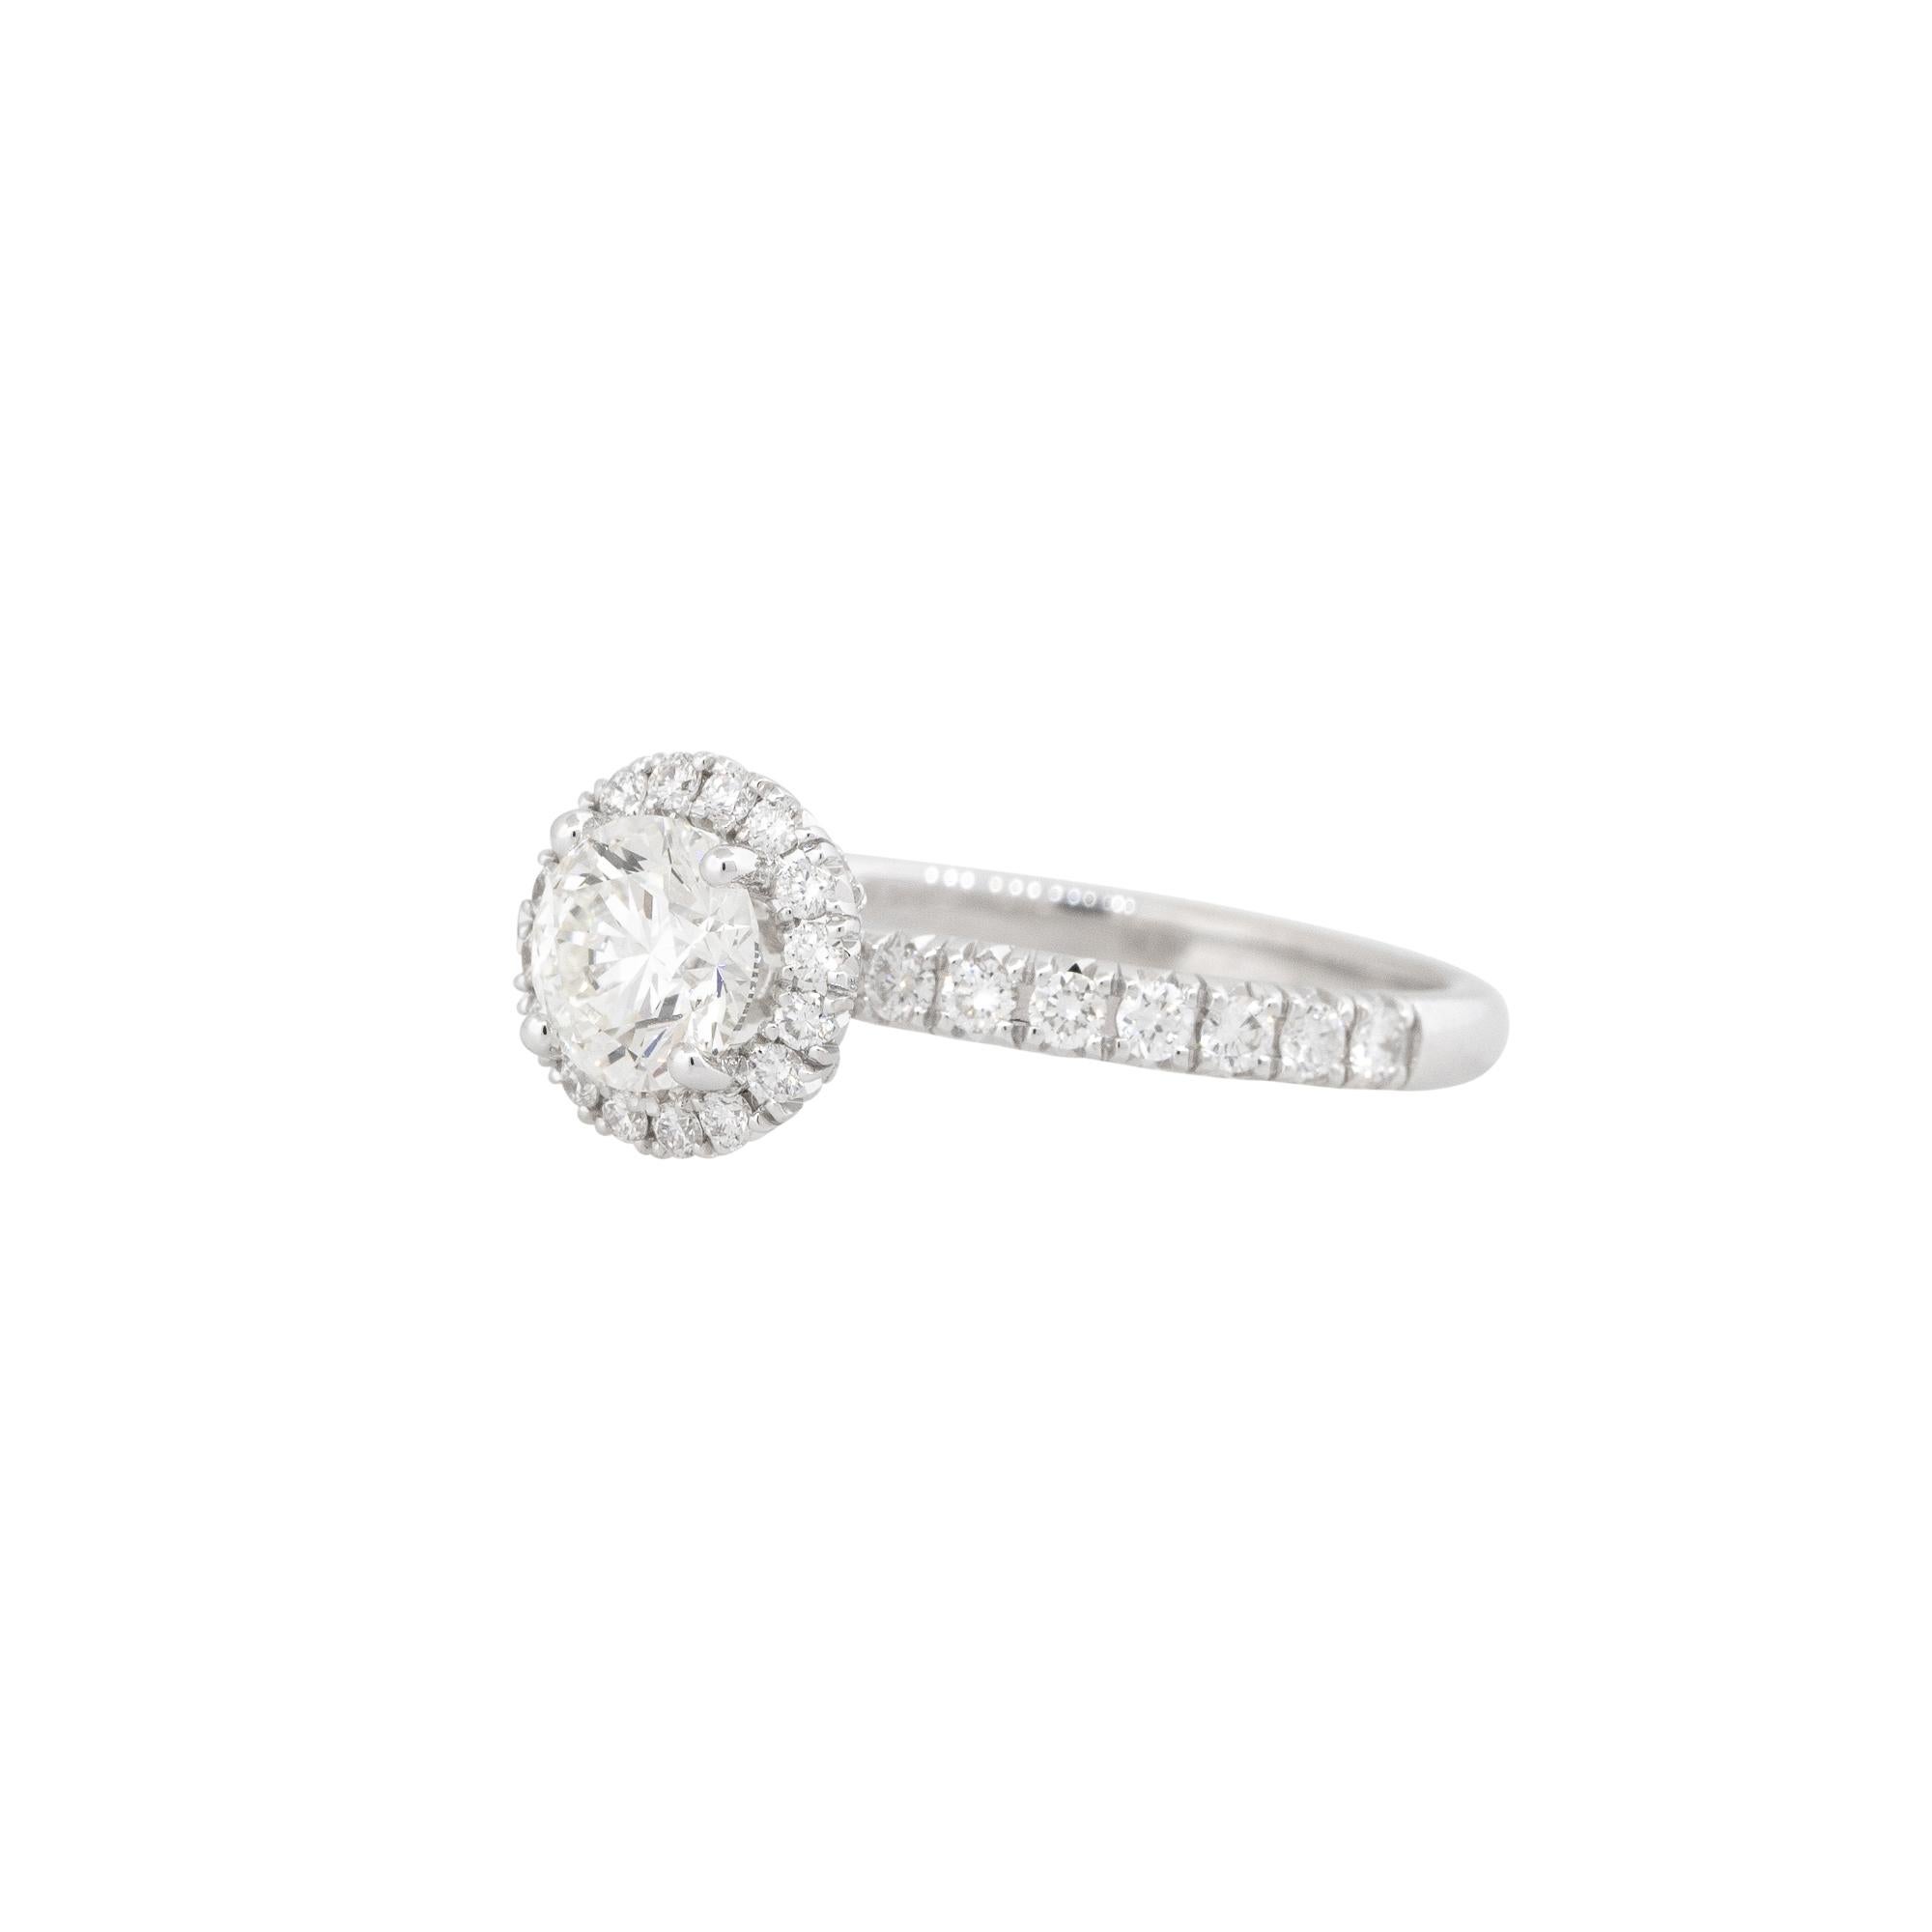 This GIA certified 1.52 carat diamond halo engagement ring is a stunning example of timeless elegance and exceptional craftsmanship. The centerpiece of the ring is a brilliant round cut diamond, weighing in at 0.80 carats, that has been expertly